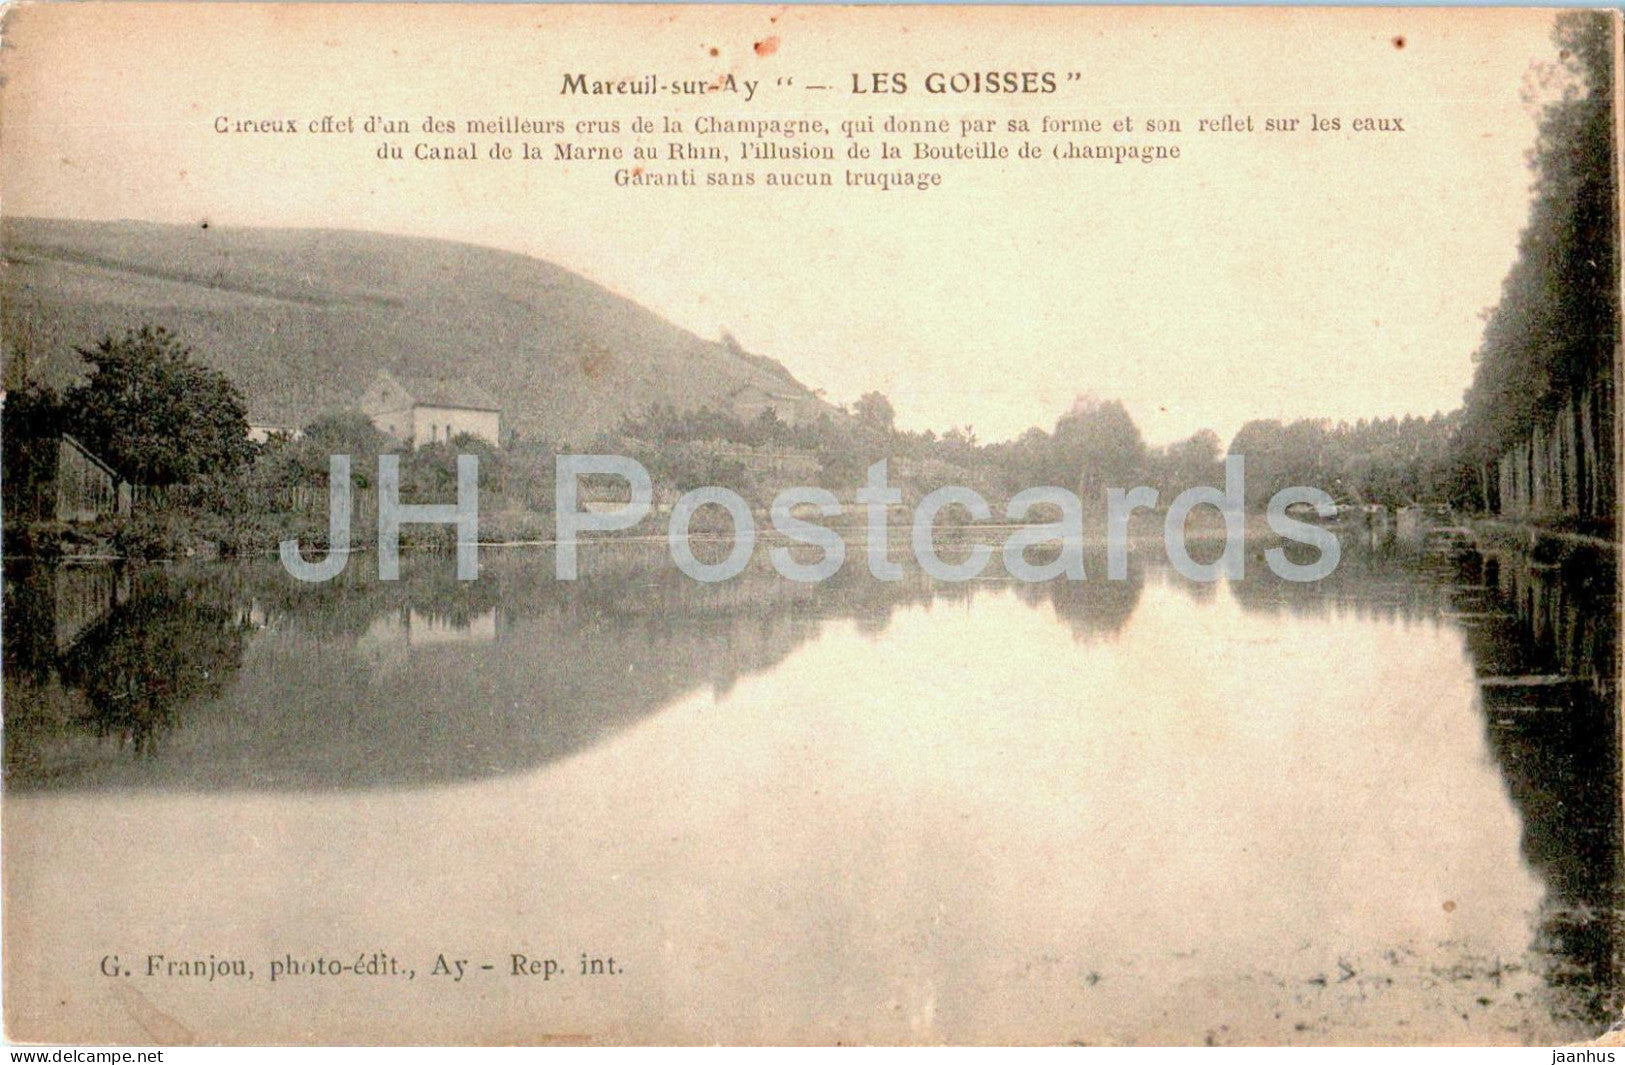 Mareuil sur Ay - Les Goisses - old postcard - 1918 - France - used - JH Postcards